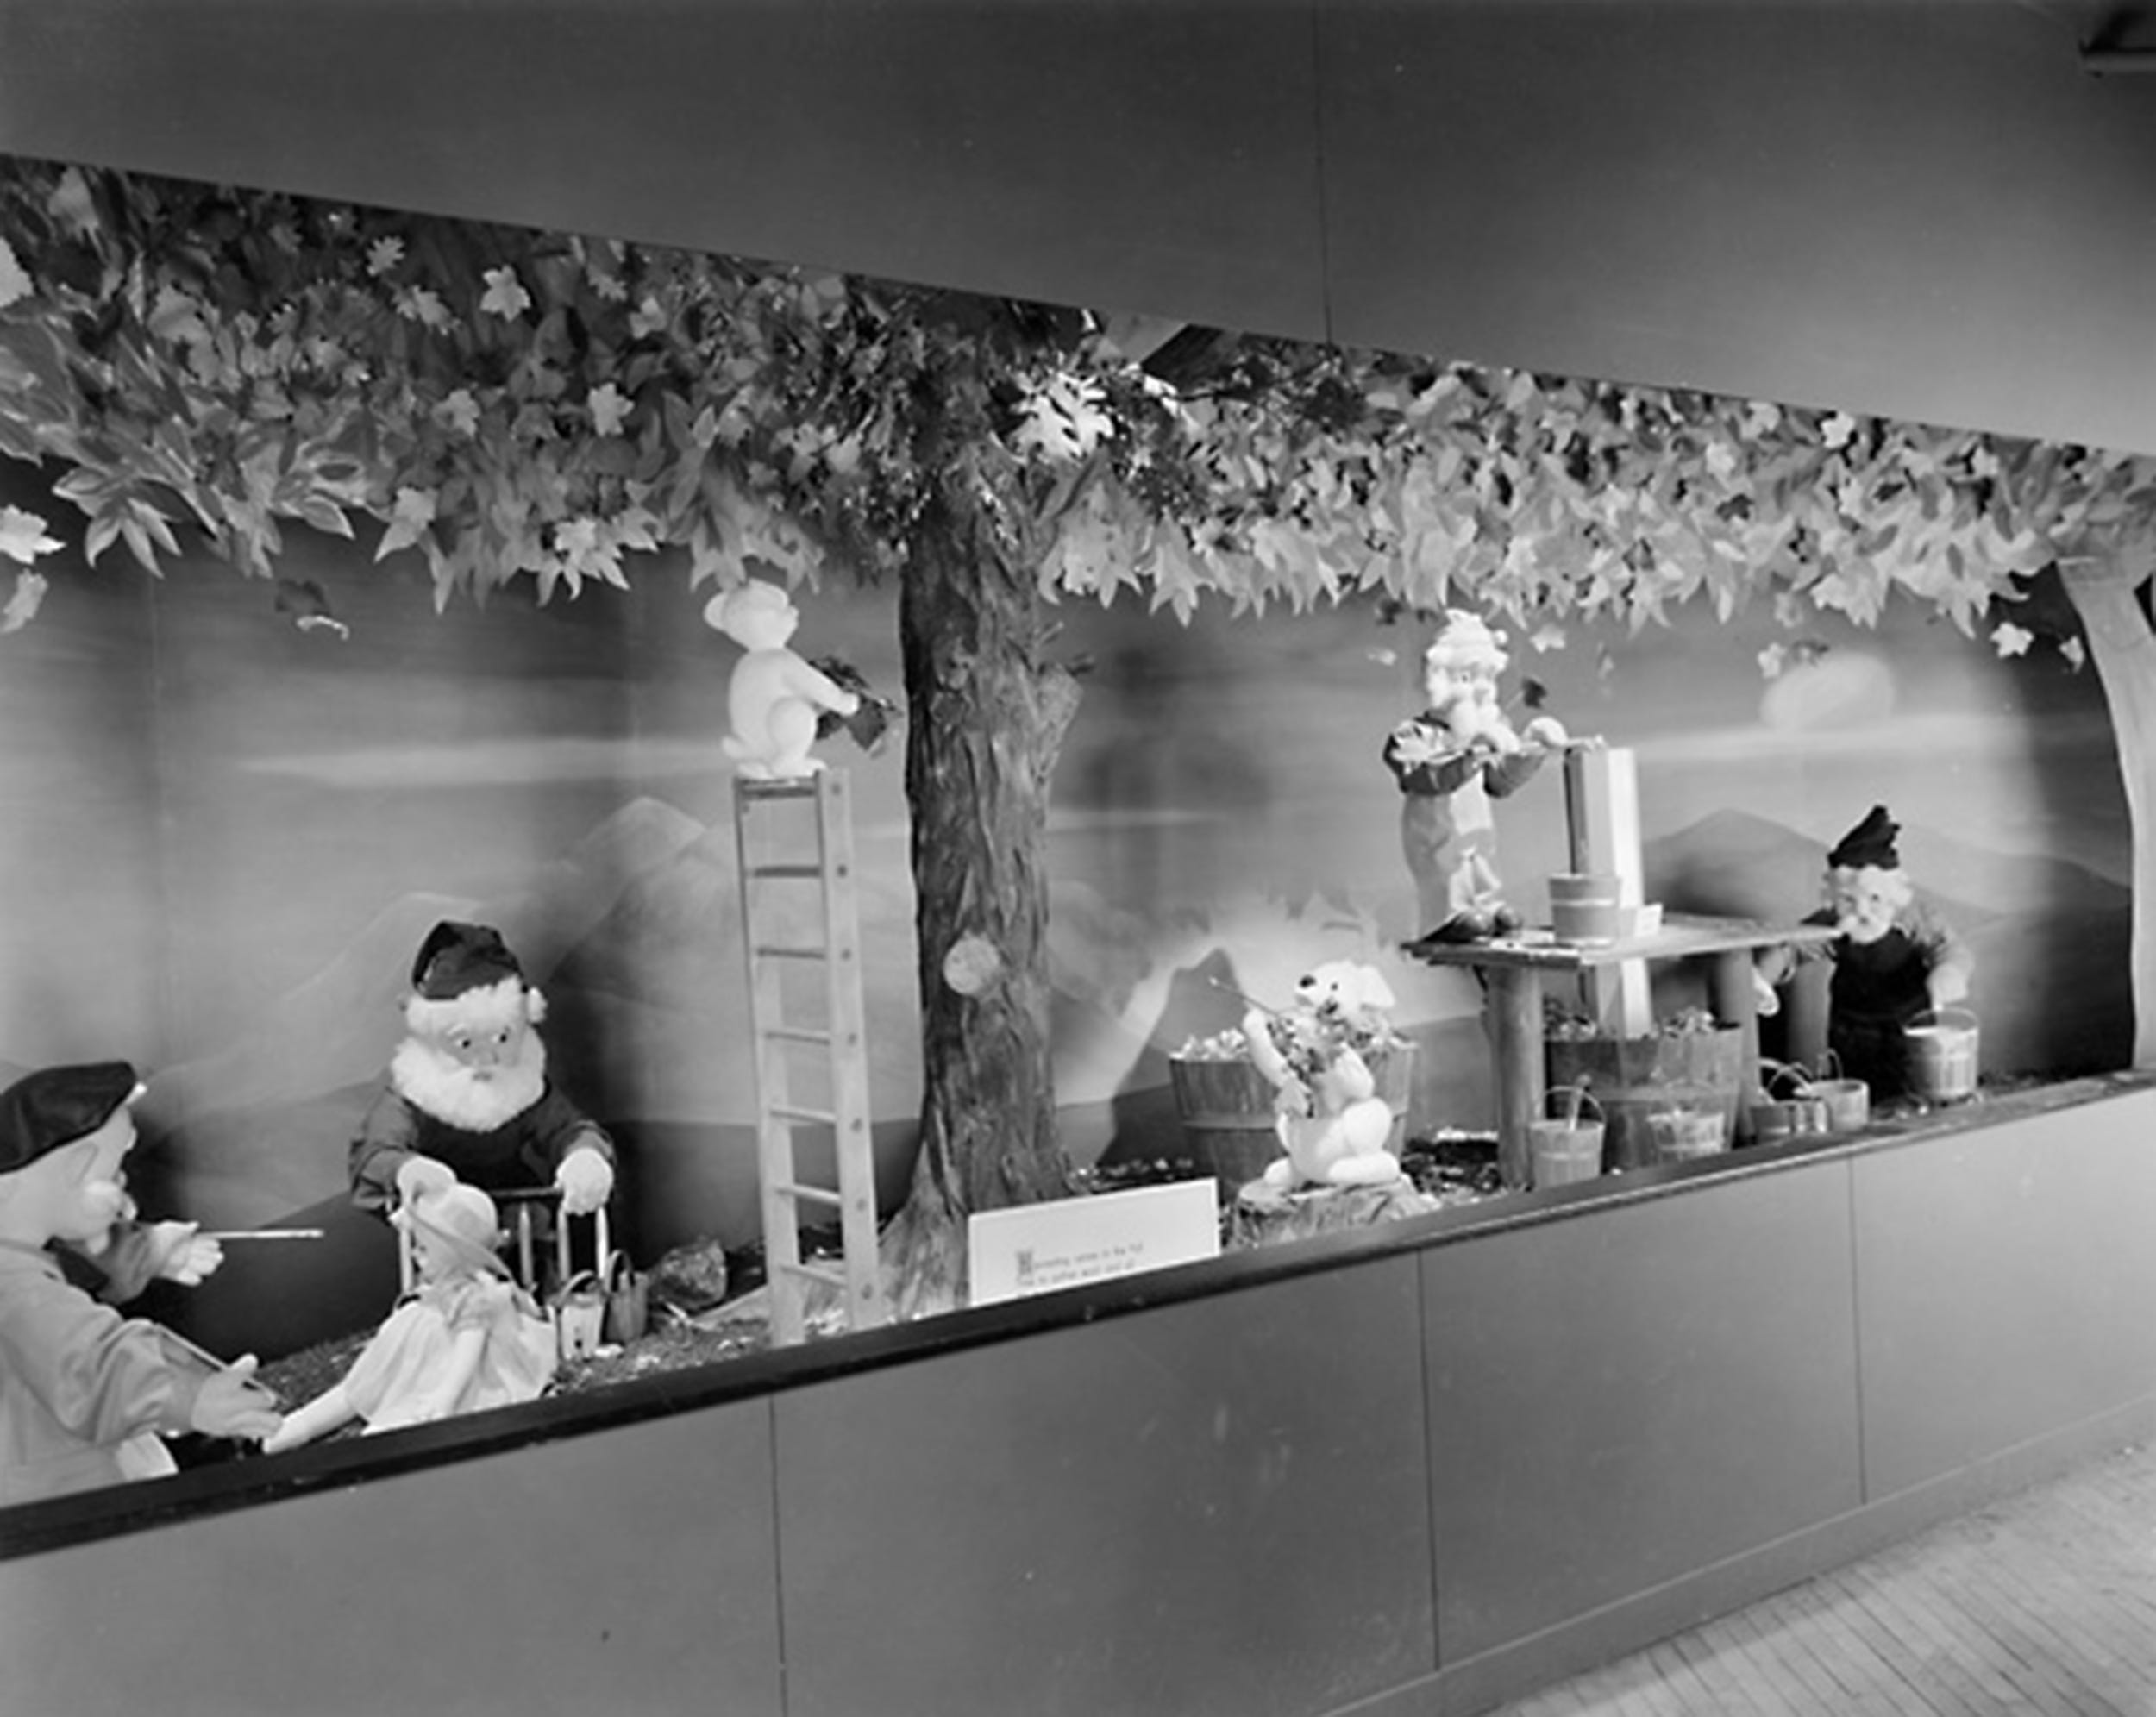 The Magic Corridor with its 12 windows of animatronic figures depicting Christmas scenes in Sibley's toy department.